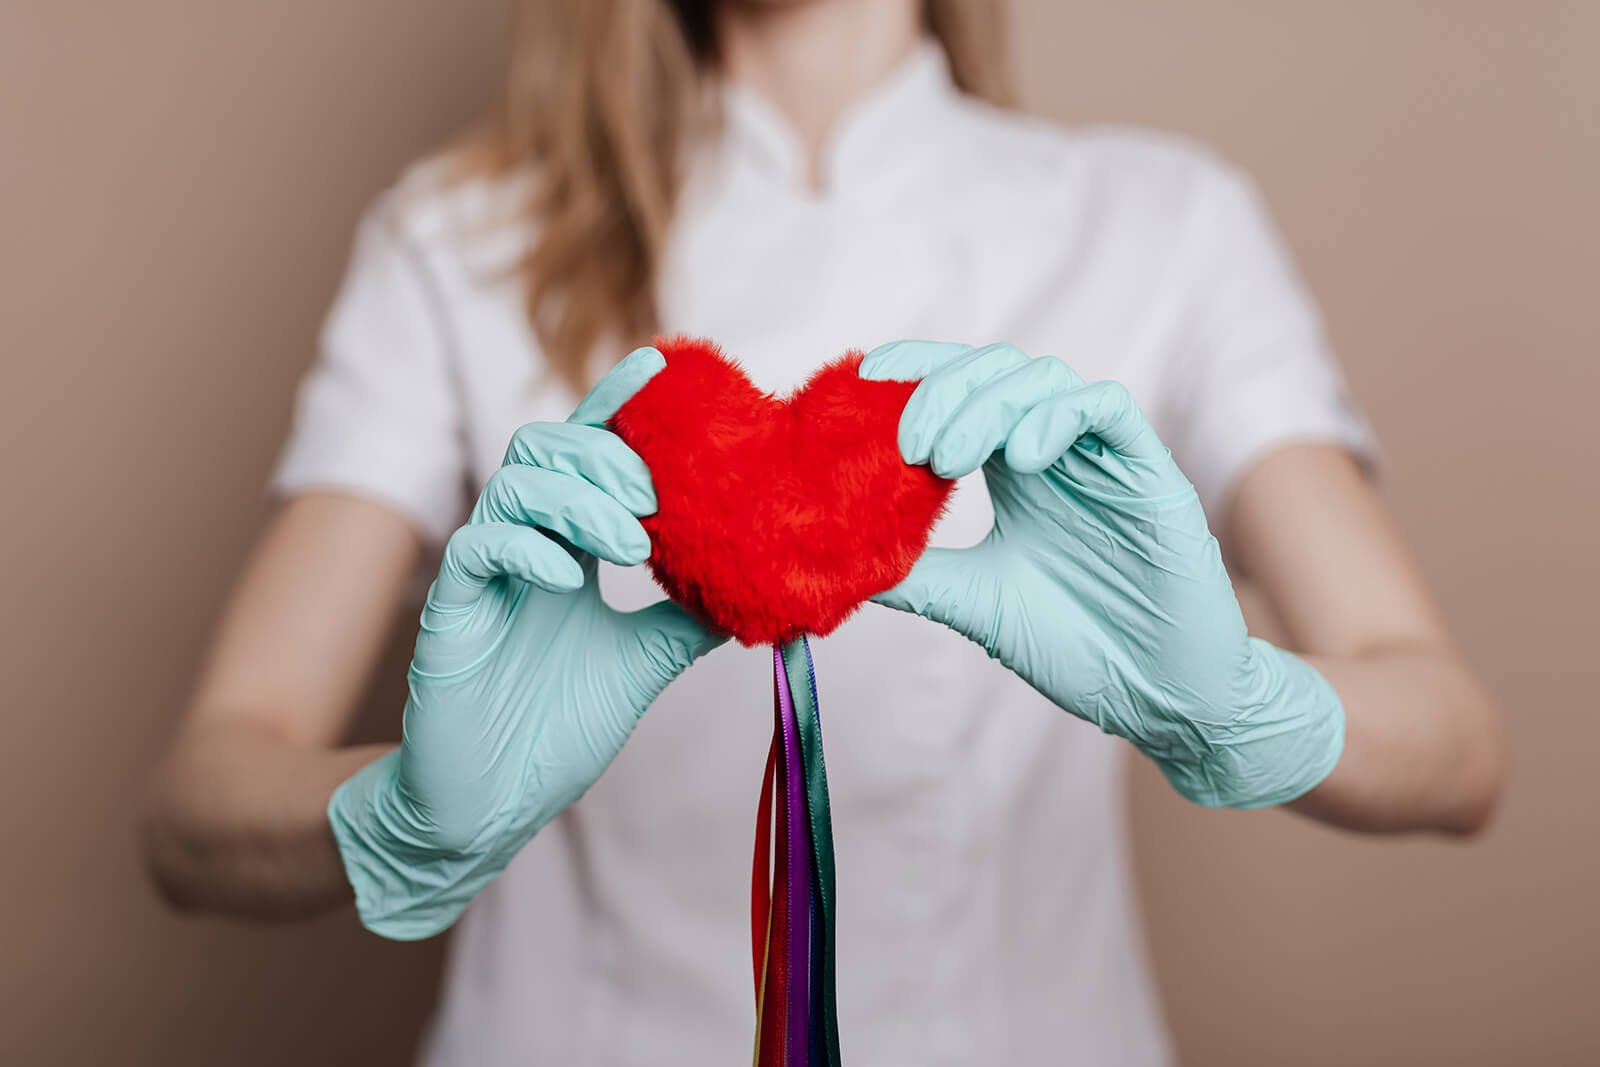 Woman Holding Red Heart with Strings